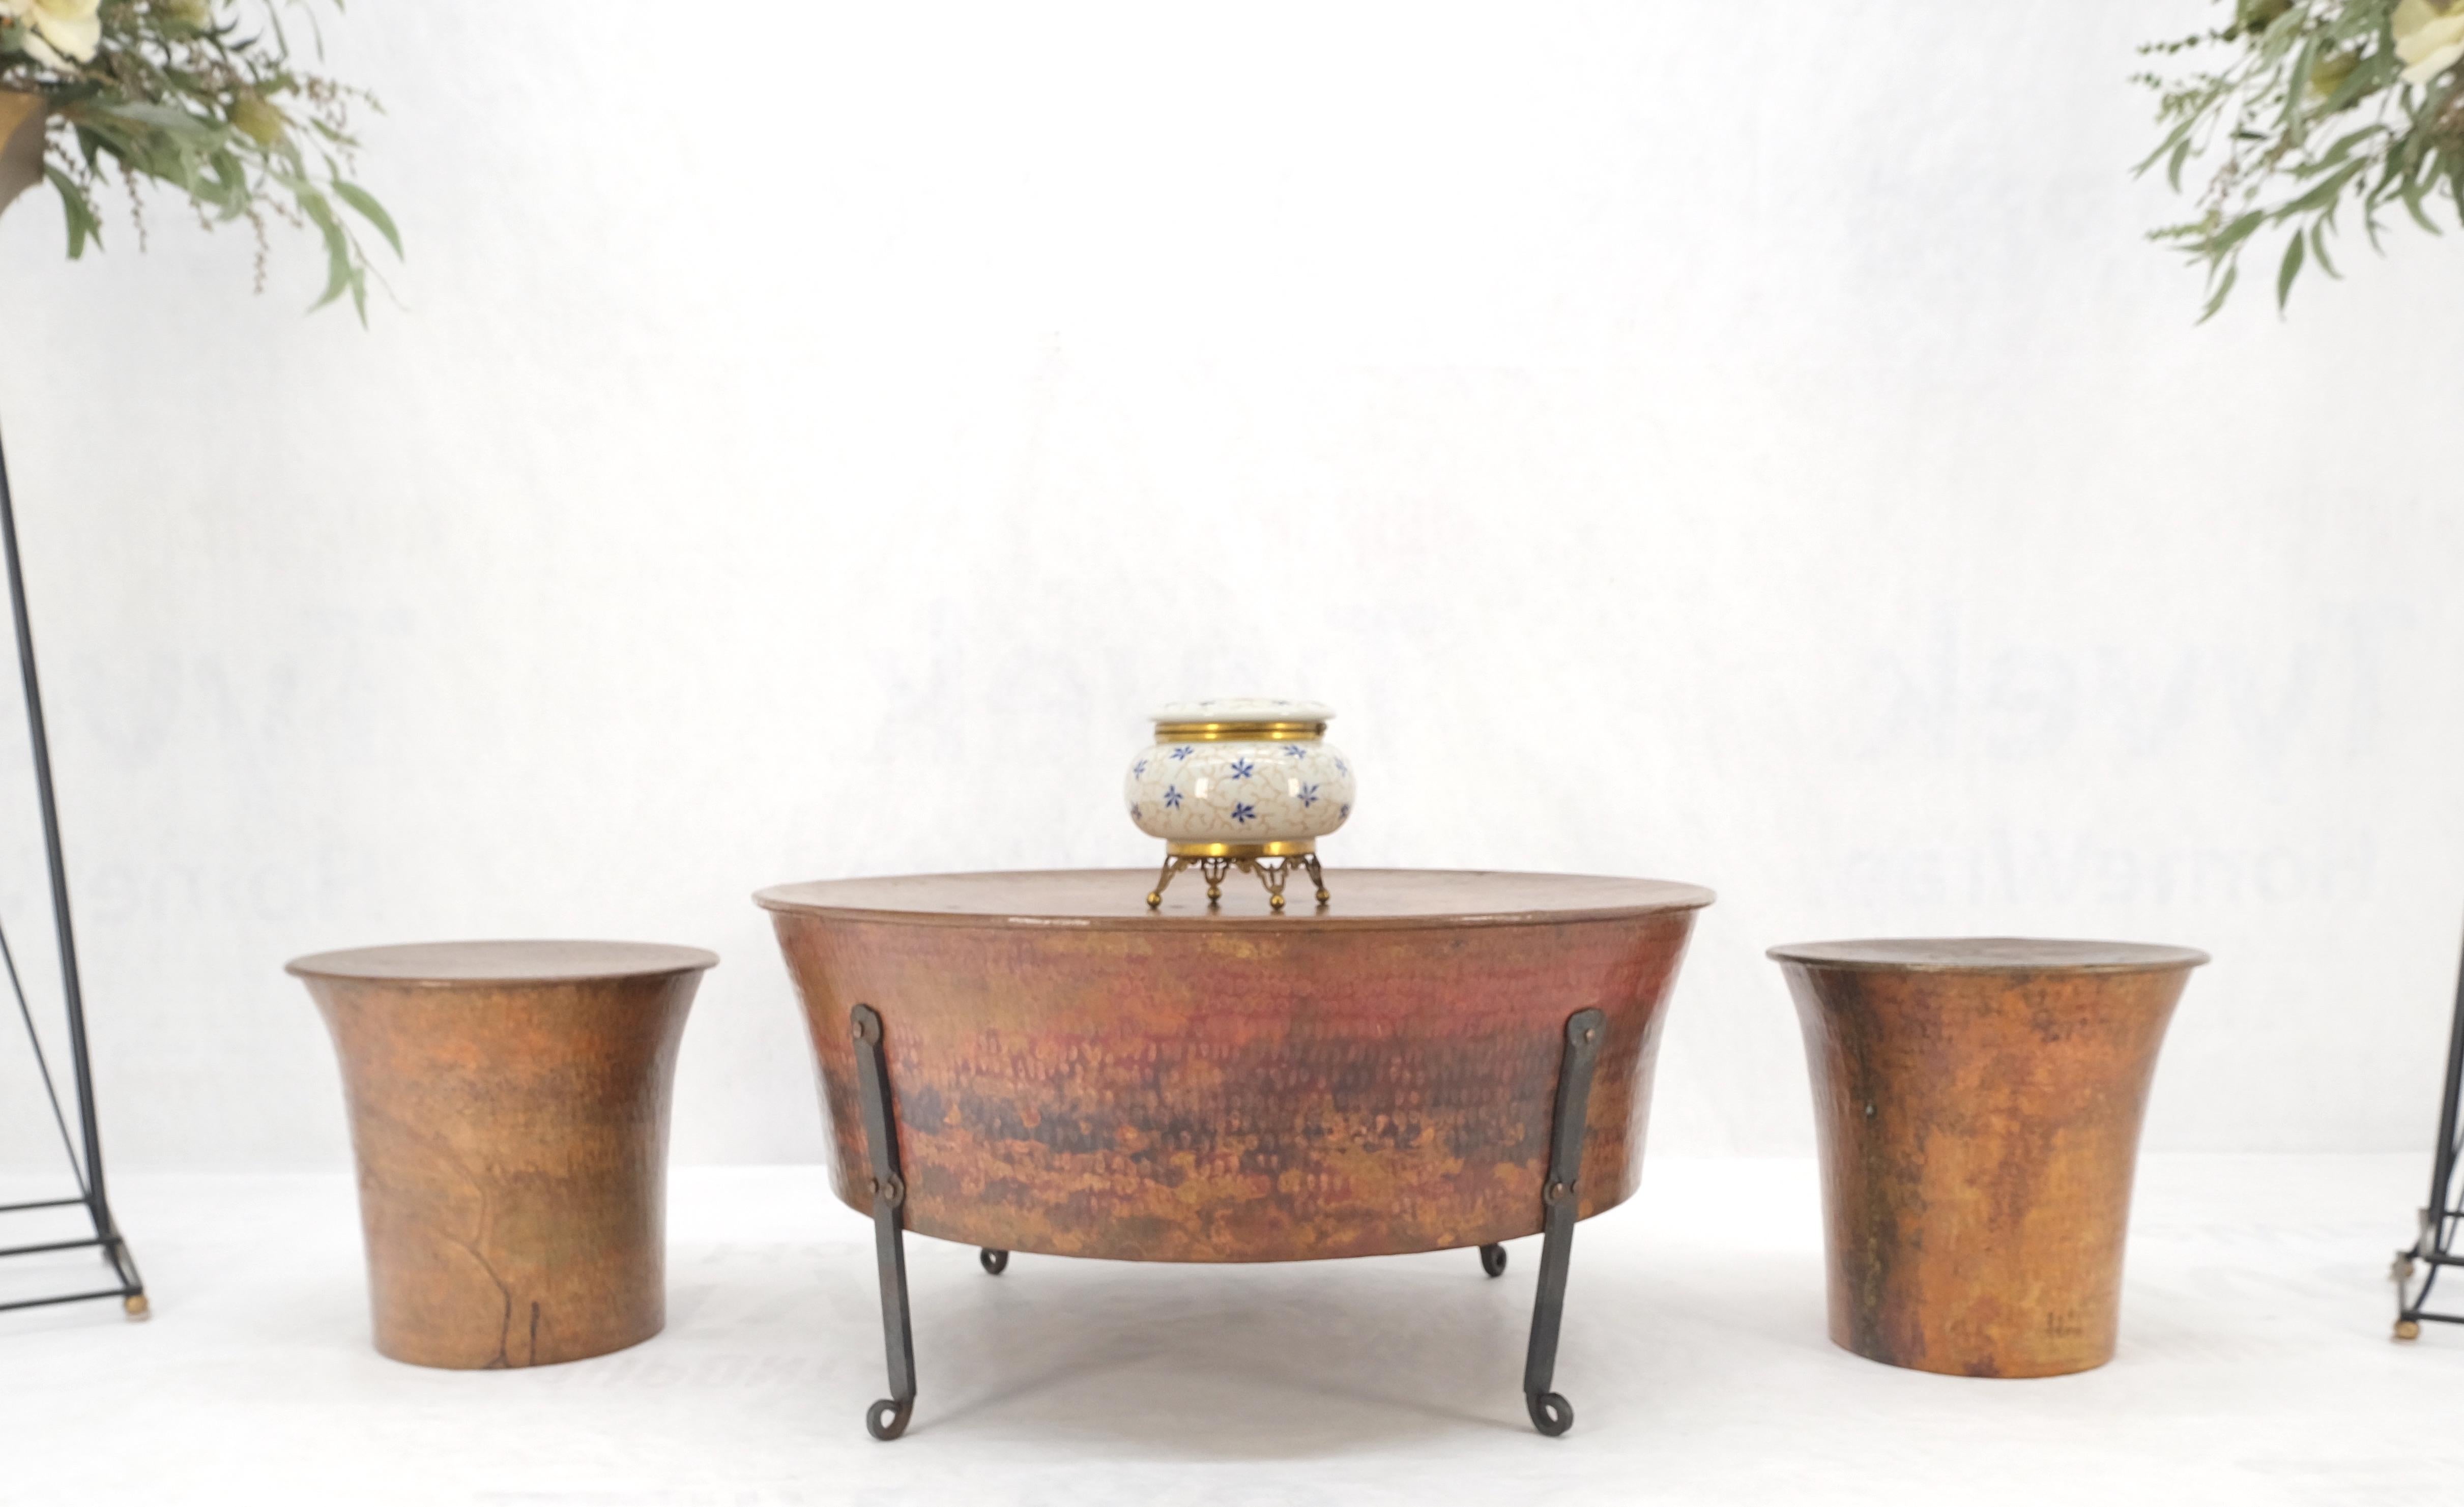 American Vintage Hummered Forged Copper & Iron Round Coffee Table & Pair of Stools Seats For Sale